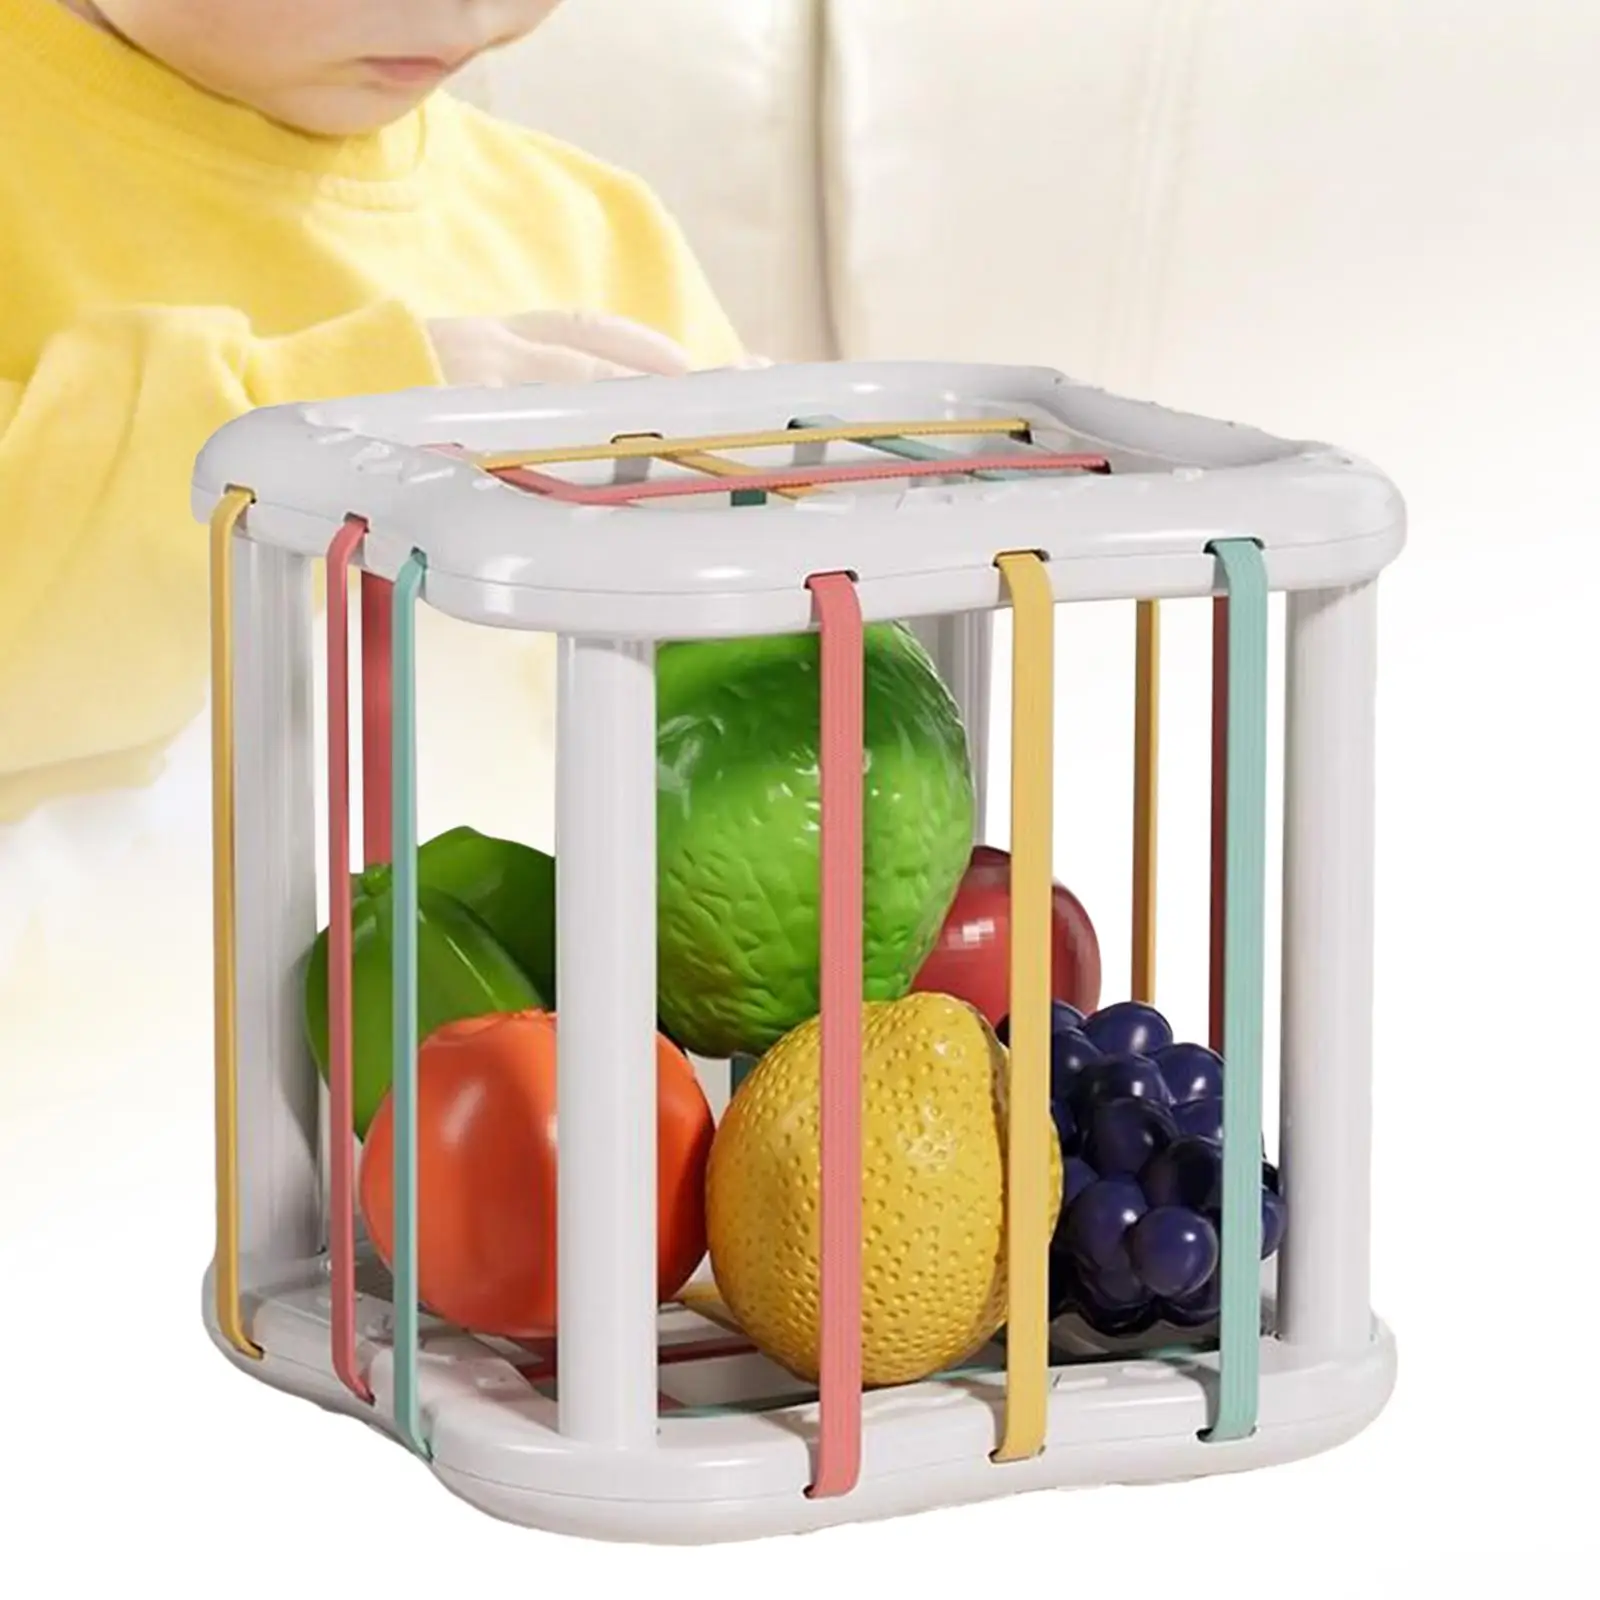 Sensory Bin with Elastic Rope and 6 Fruits Balls Motor Skills Baby Shape Sorter for Kids Children Age 1 2 3 Holiday Gifts